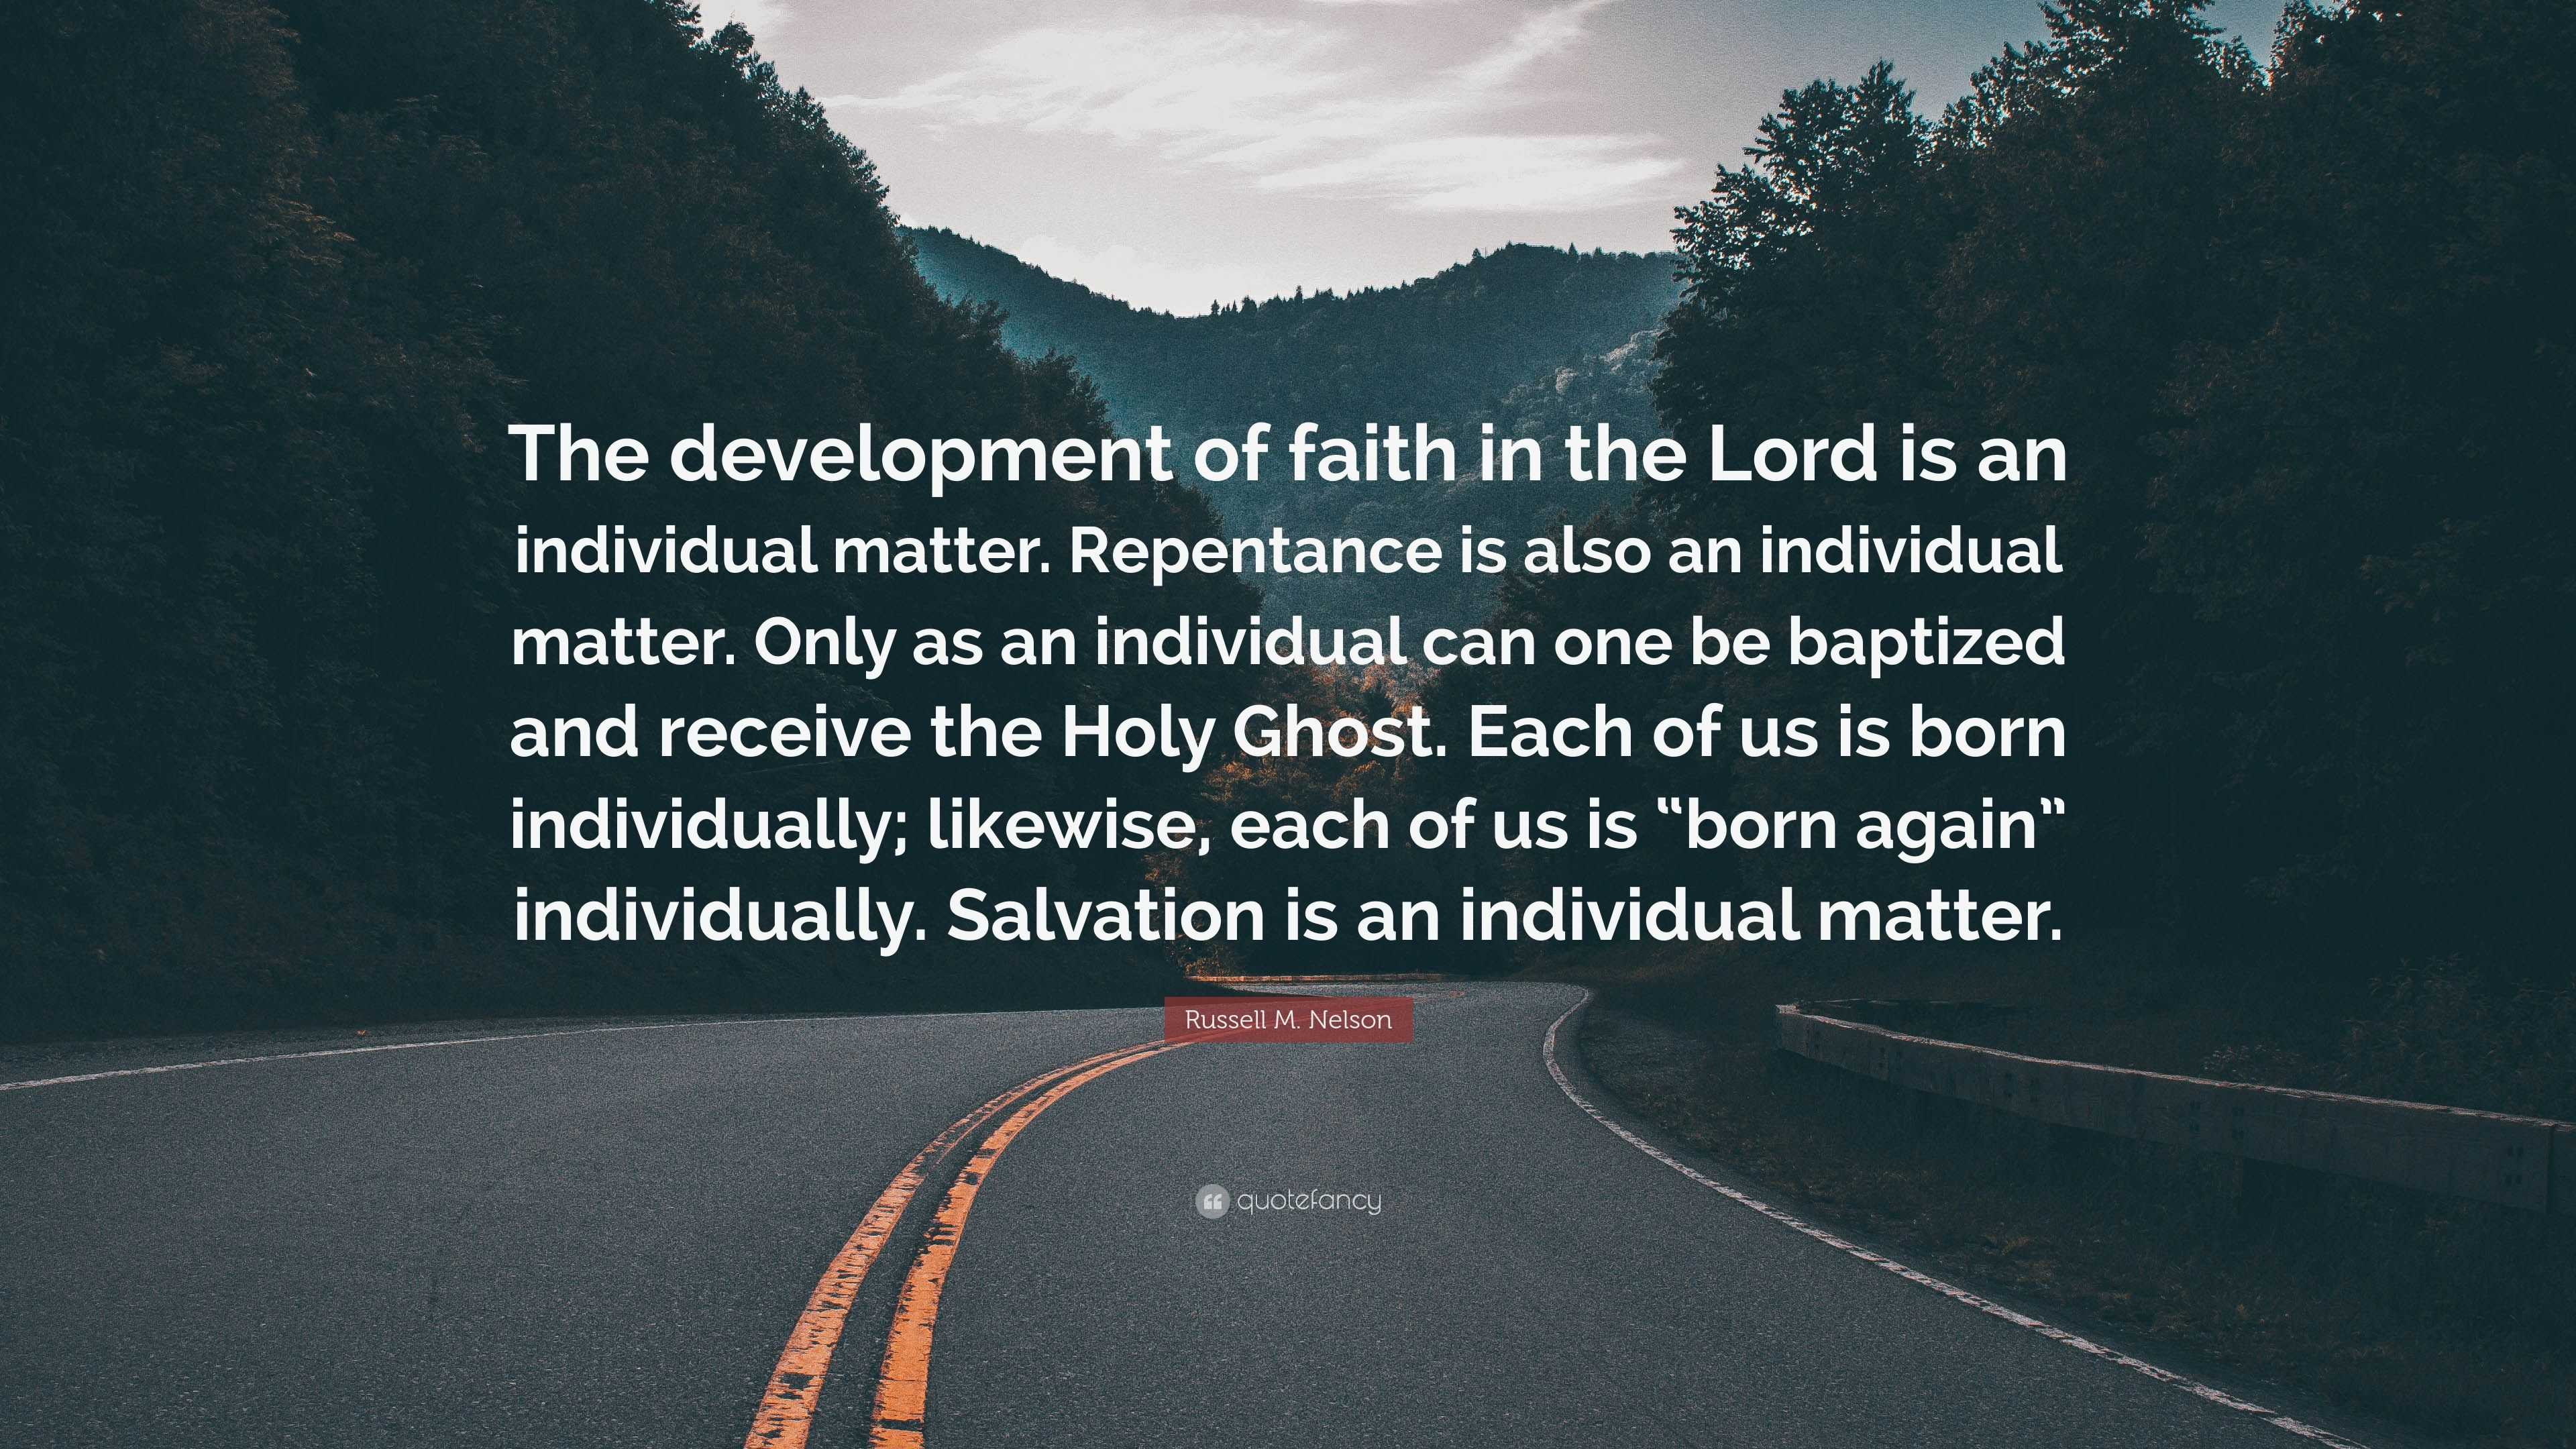 Russell M. Nelson Quote: “The development of faith in the Lord is an ...